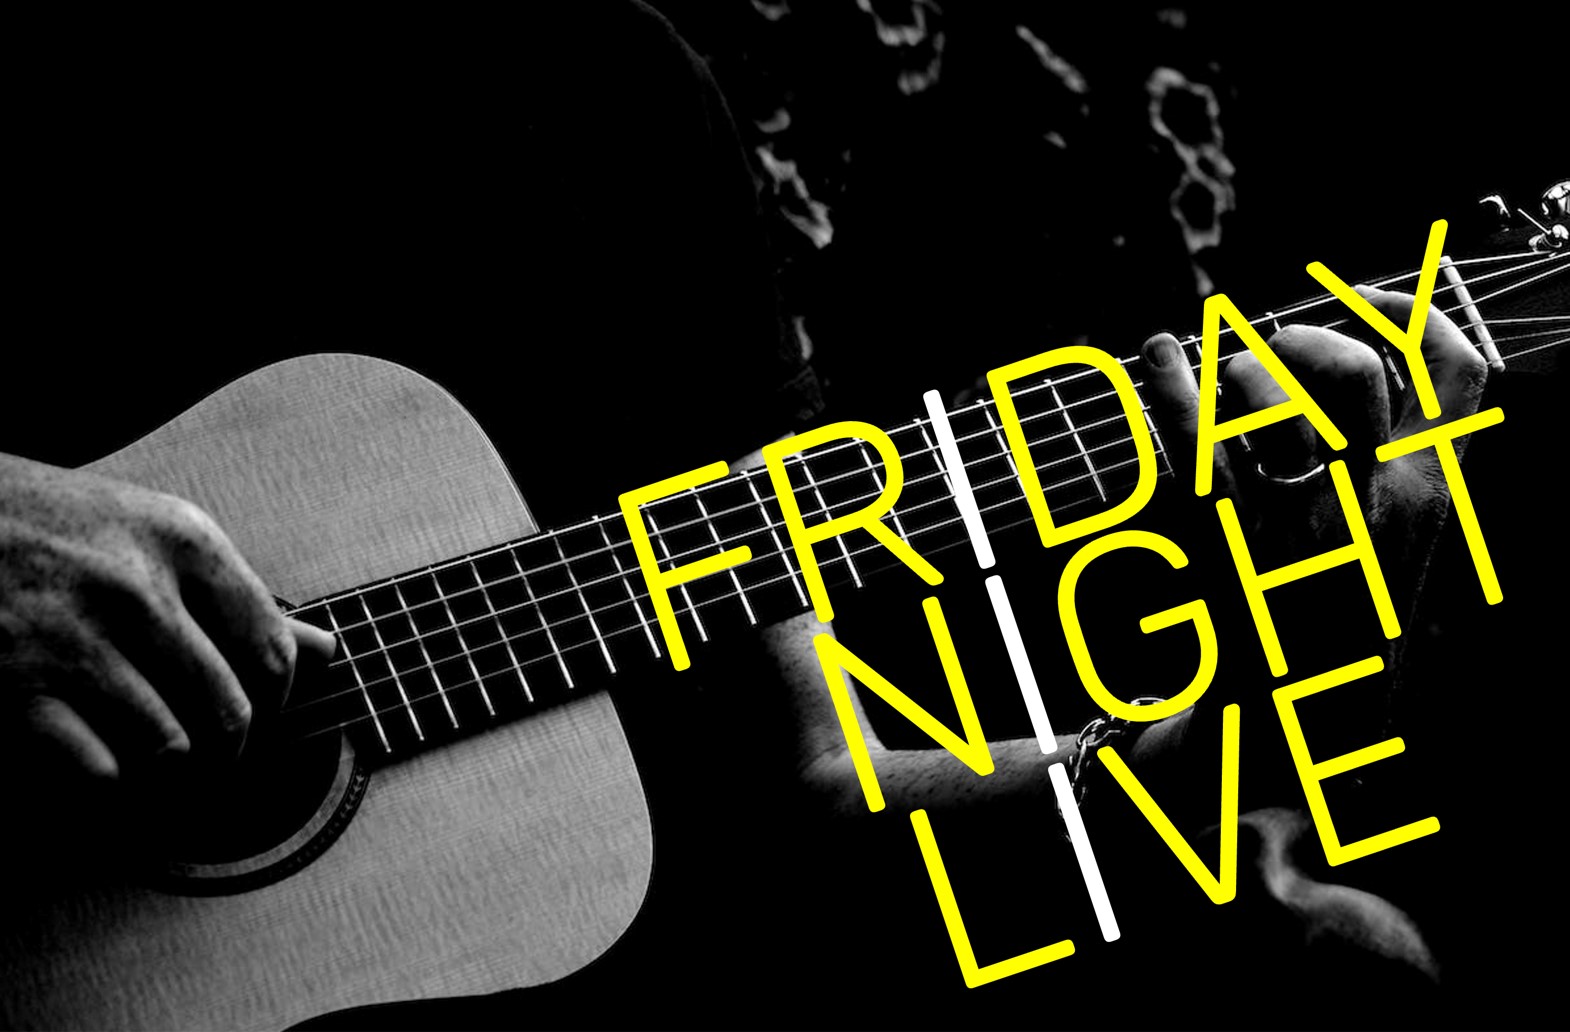 Live Music every Friday